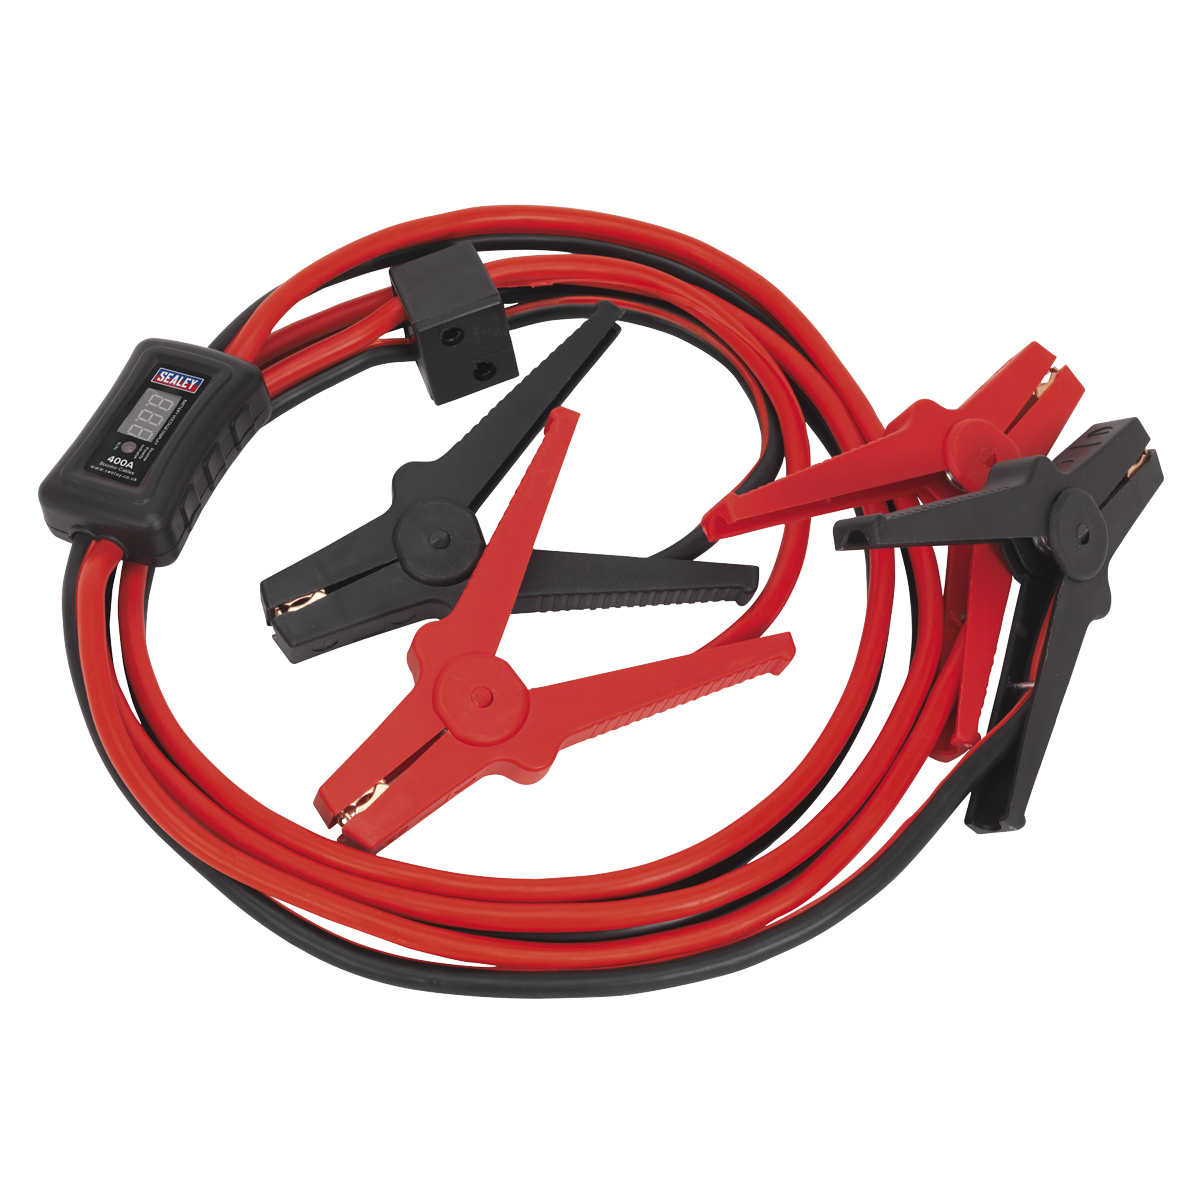 Booster Cables 16mm² x 3m 400A with Electronics Protection - BC16403SR - Farming Parts